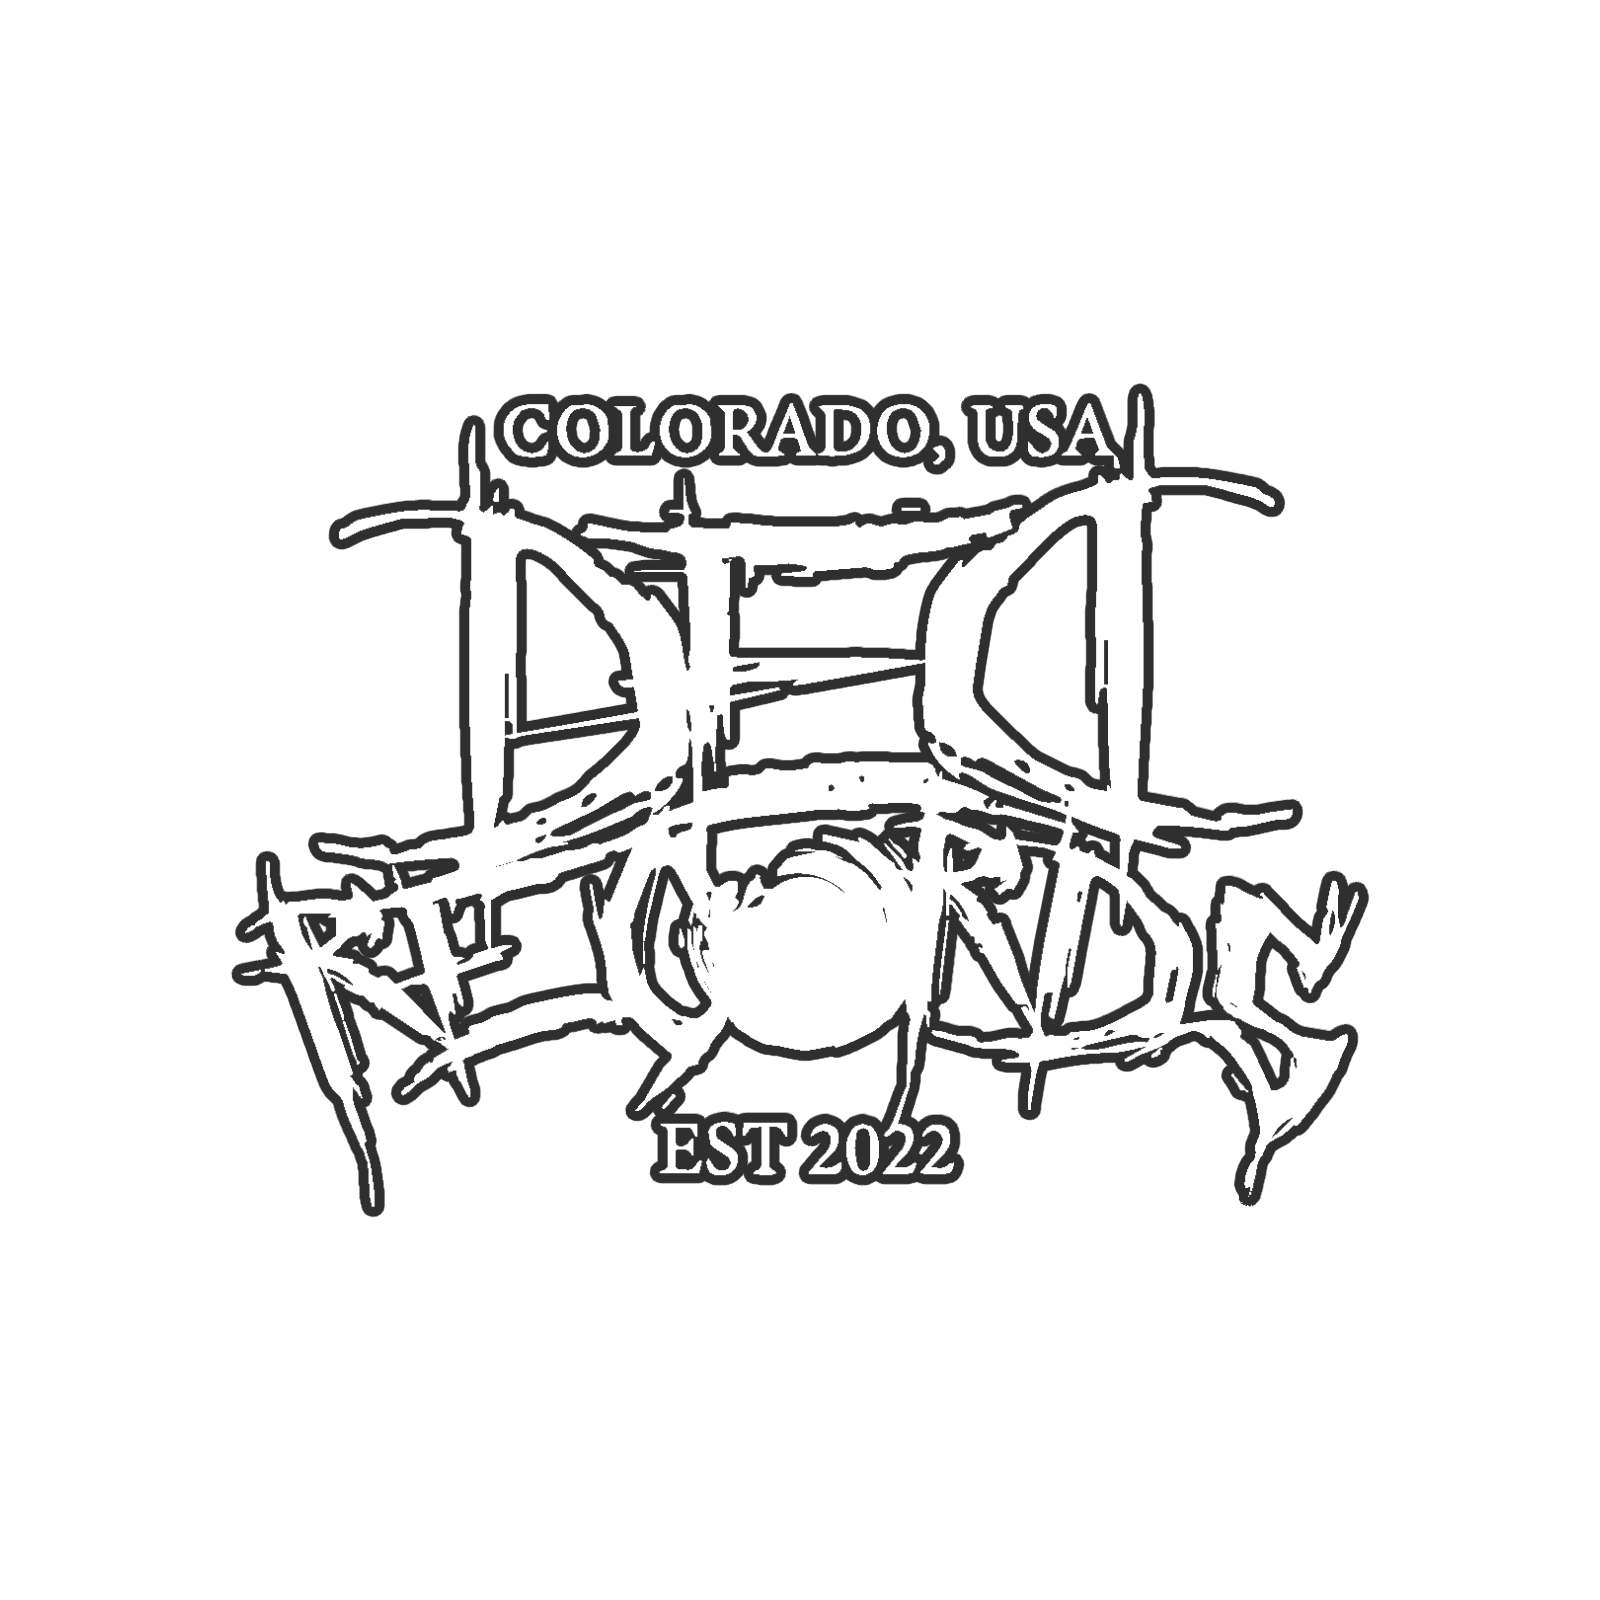 Ded Records